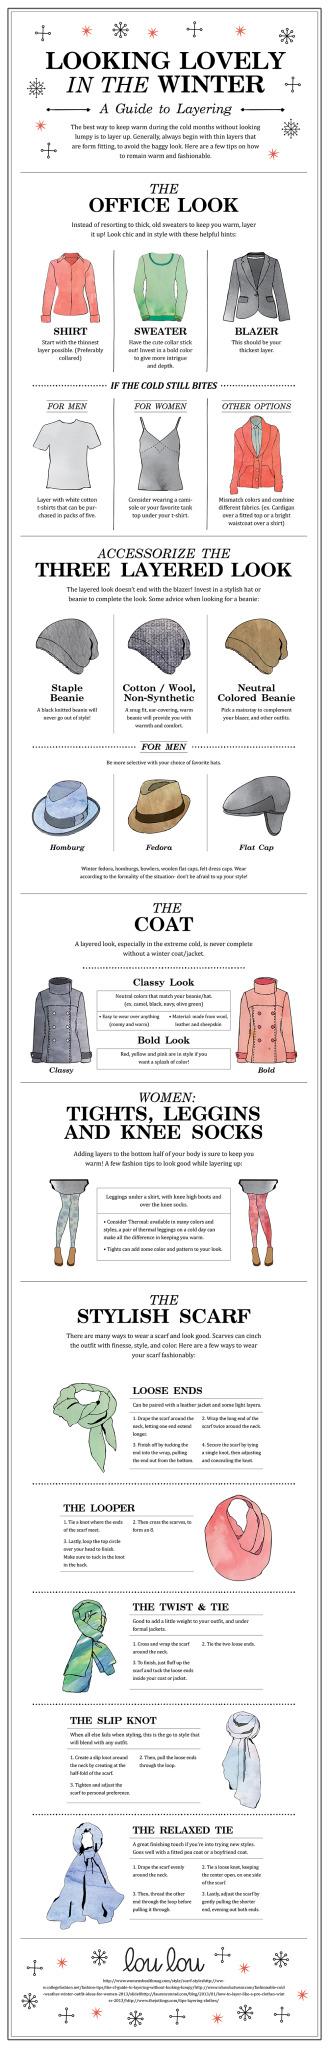 Looking Lovely in the Winter | lou lou boutiques Infographic